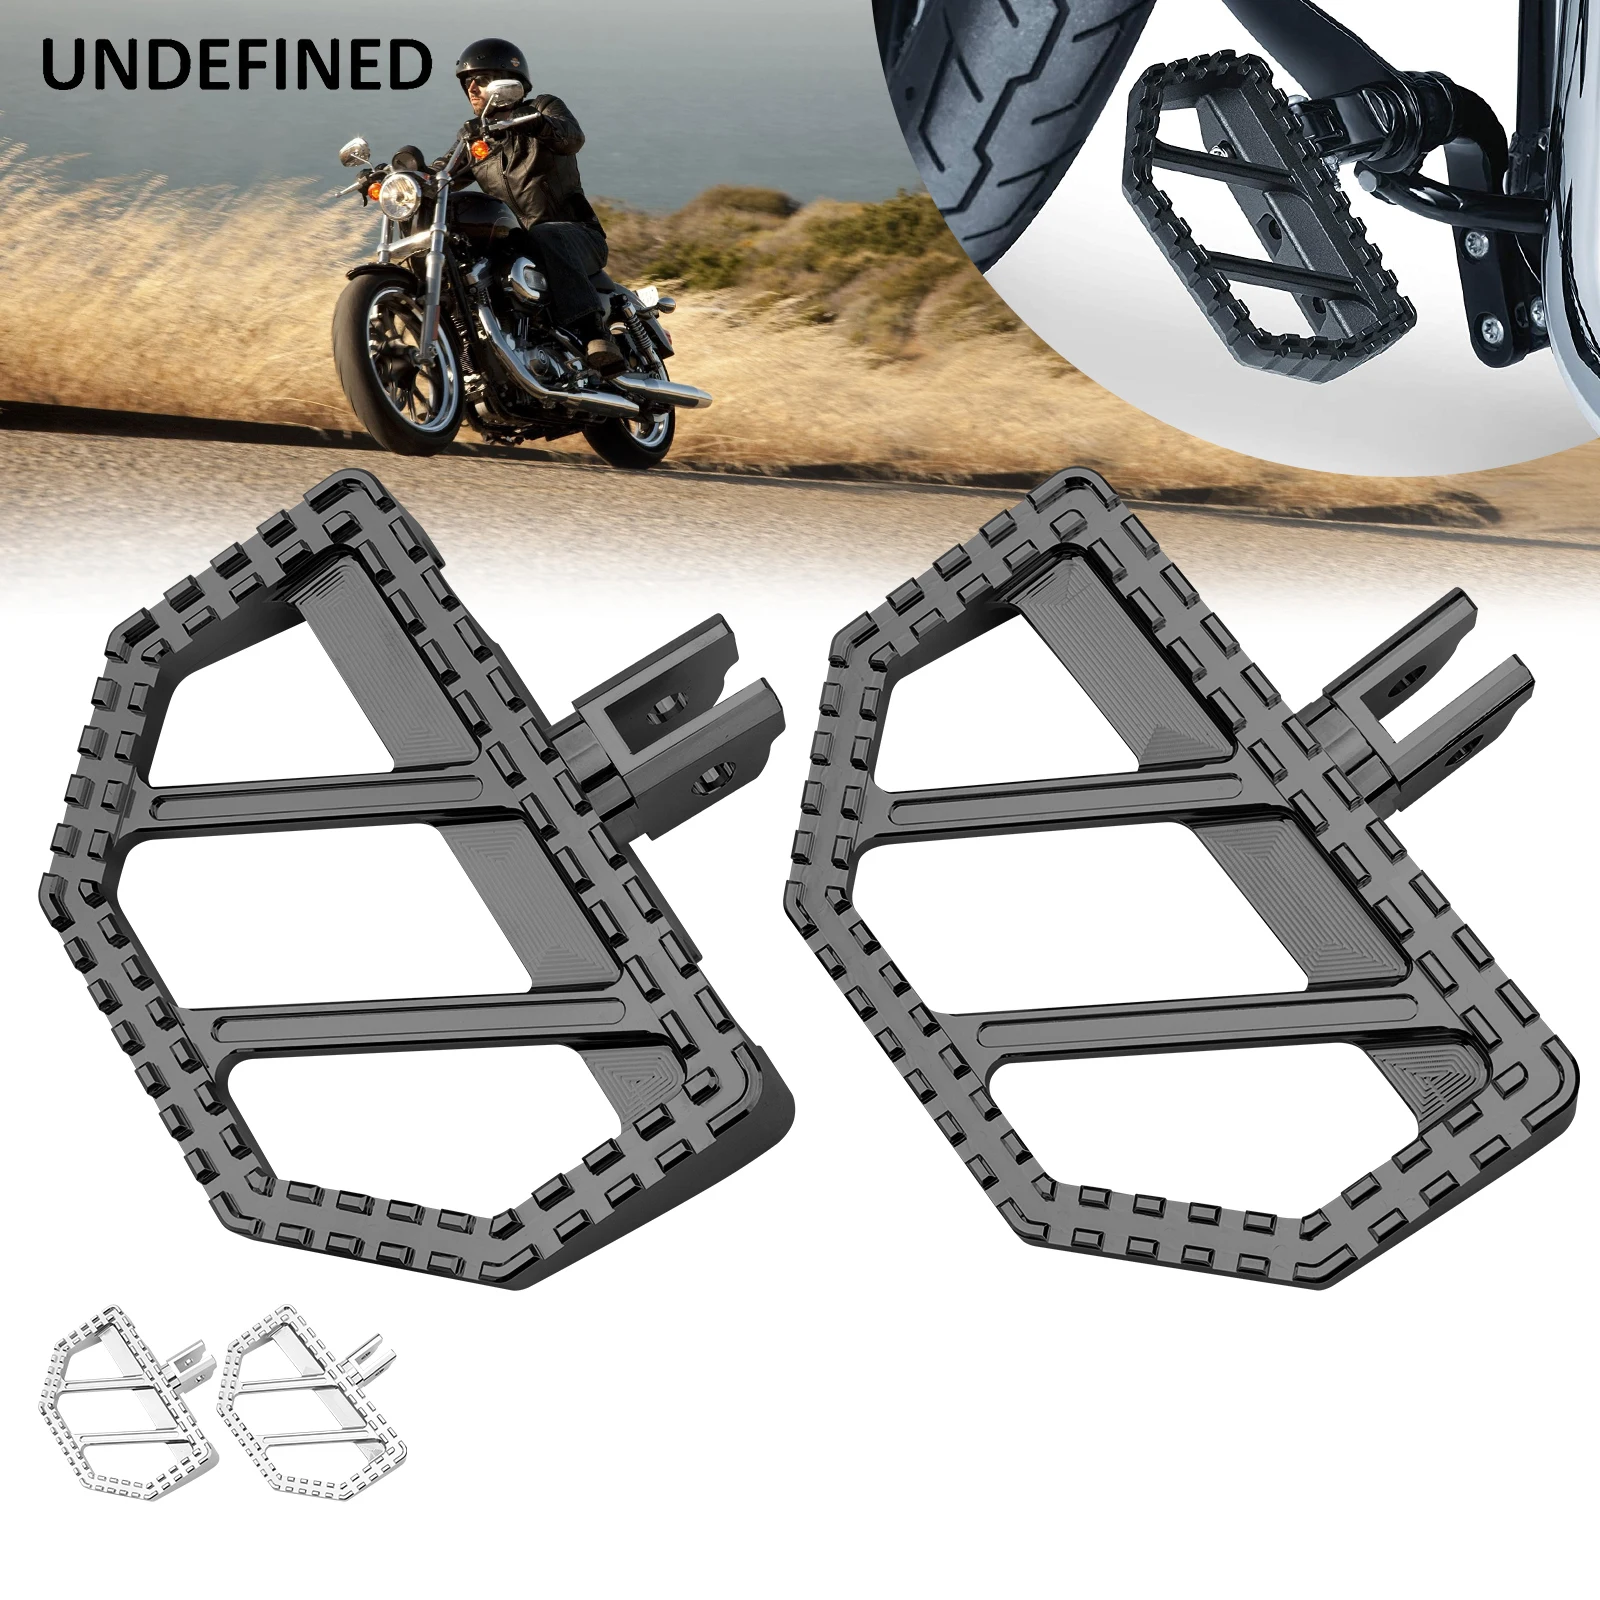 

Front Foot Pegs Riot Floorboards For Harley Softail FLFBS Fat Boy FLHCS Heritage Classic FXBRS Breakout FXLRS Low Rider 18-2023